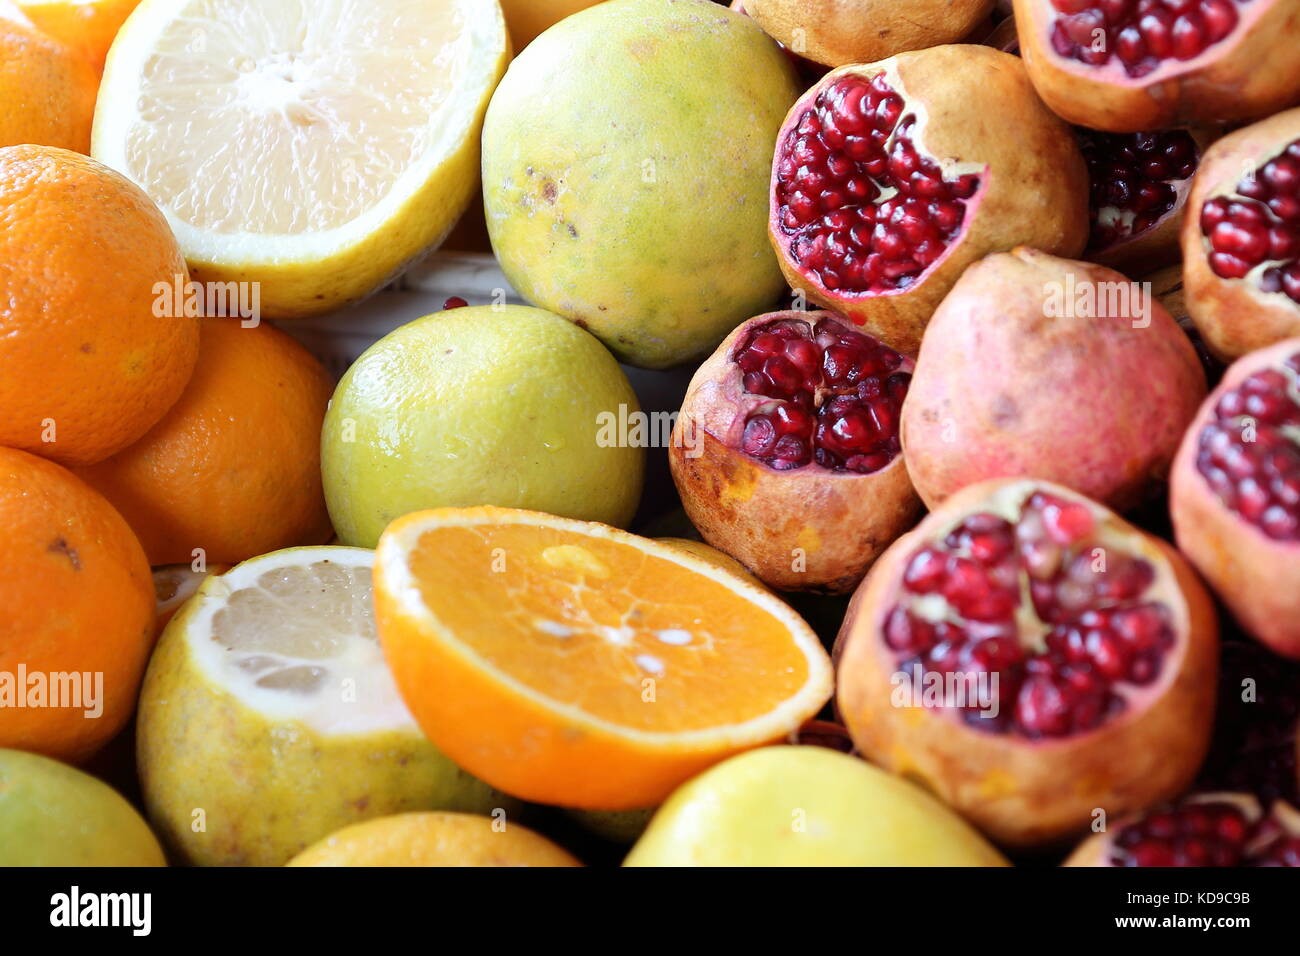 A composition of fresh fruit, including orange, apple, pomegranate and lemmon, taken in a bazaar / souk in Teheran, Iran. Freshly juices were served. Stock Photo